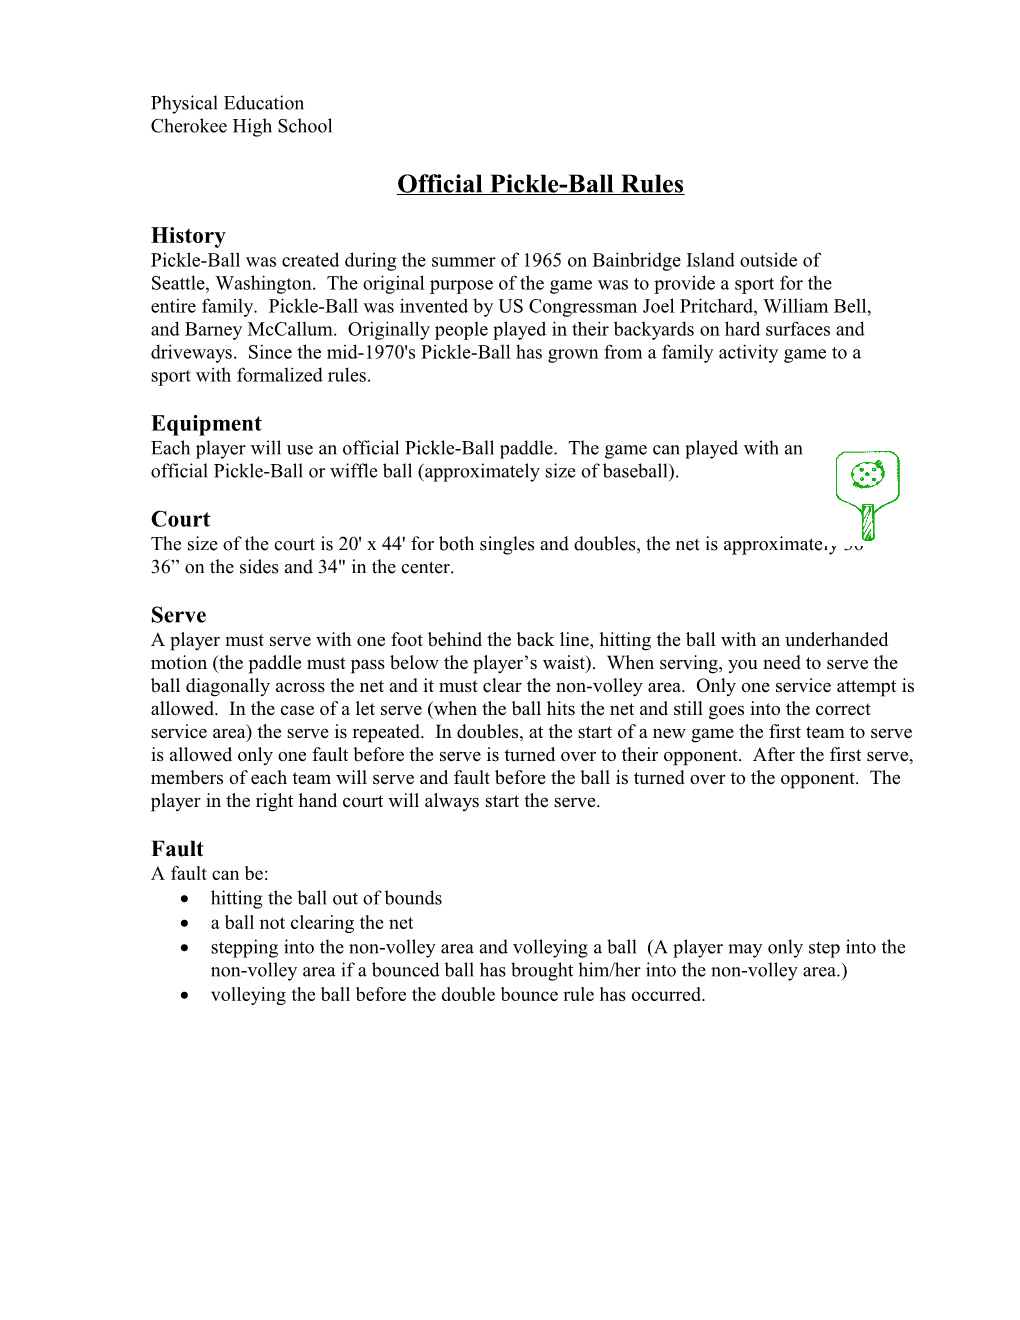 Official Pickle-Ball Rules